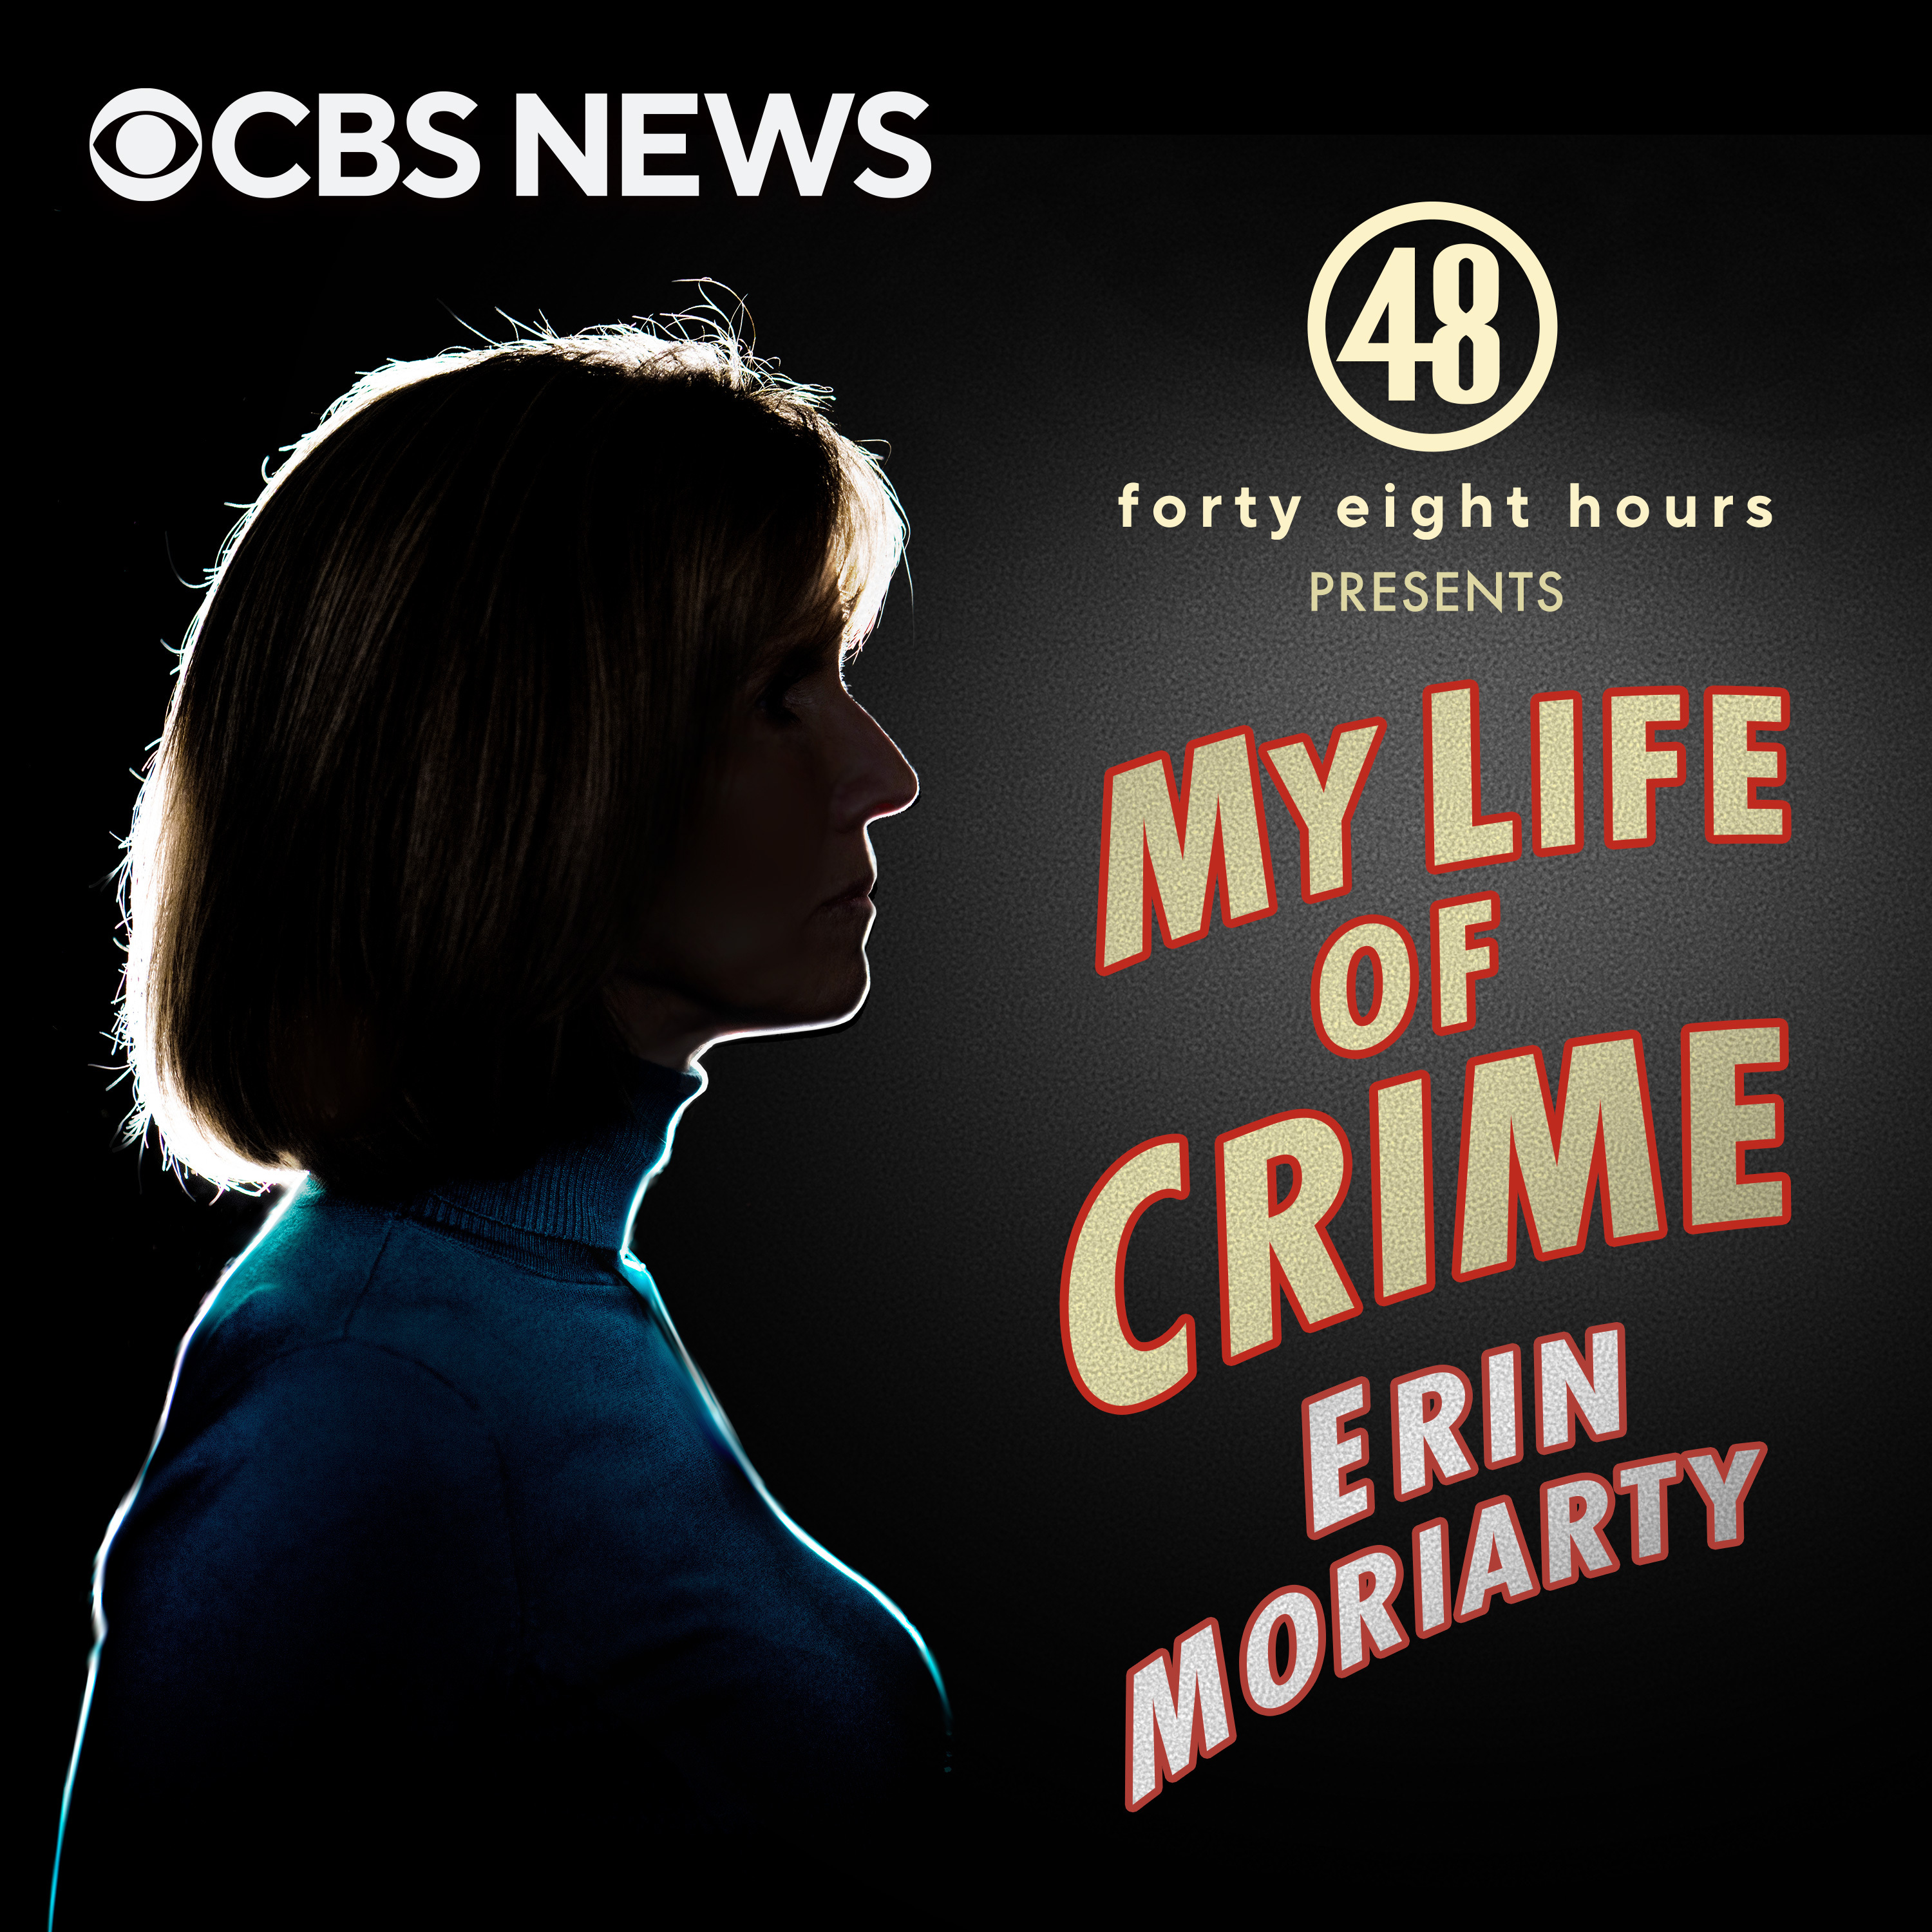 The House: Home Renovation Homicide | My Life of Crime by CBS News